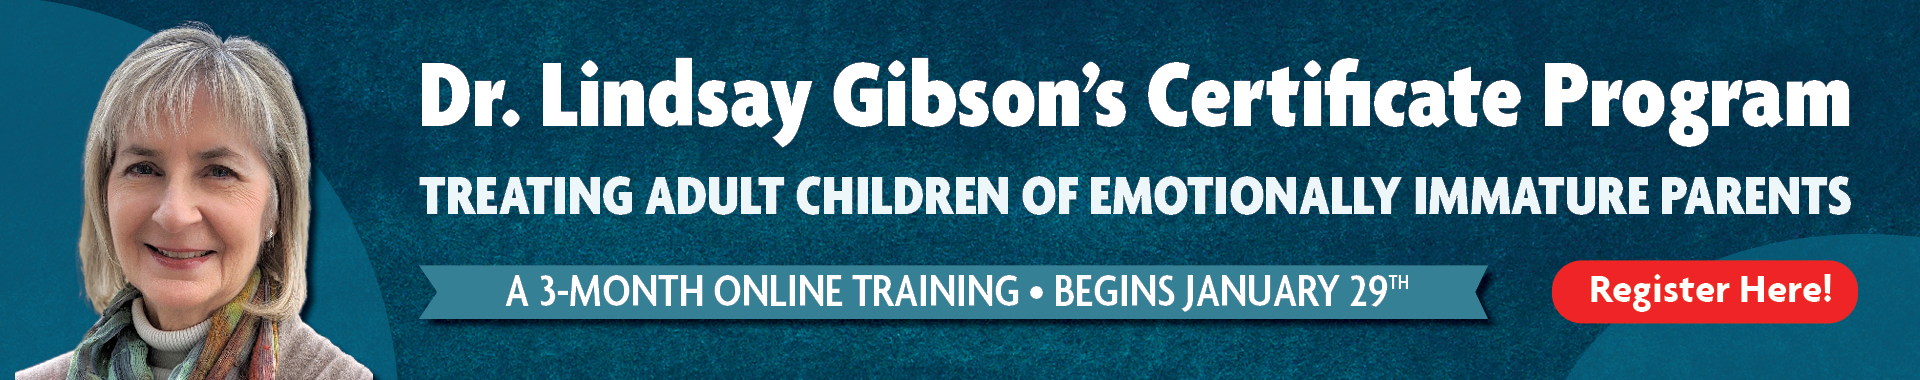 Dr. Lindsay Gibson’s 3-Month Online Certificate Program on Treating Adult Children of Emotionally Immature Parents